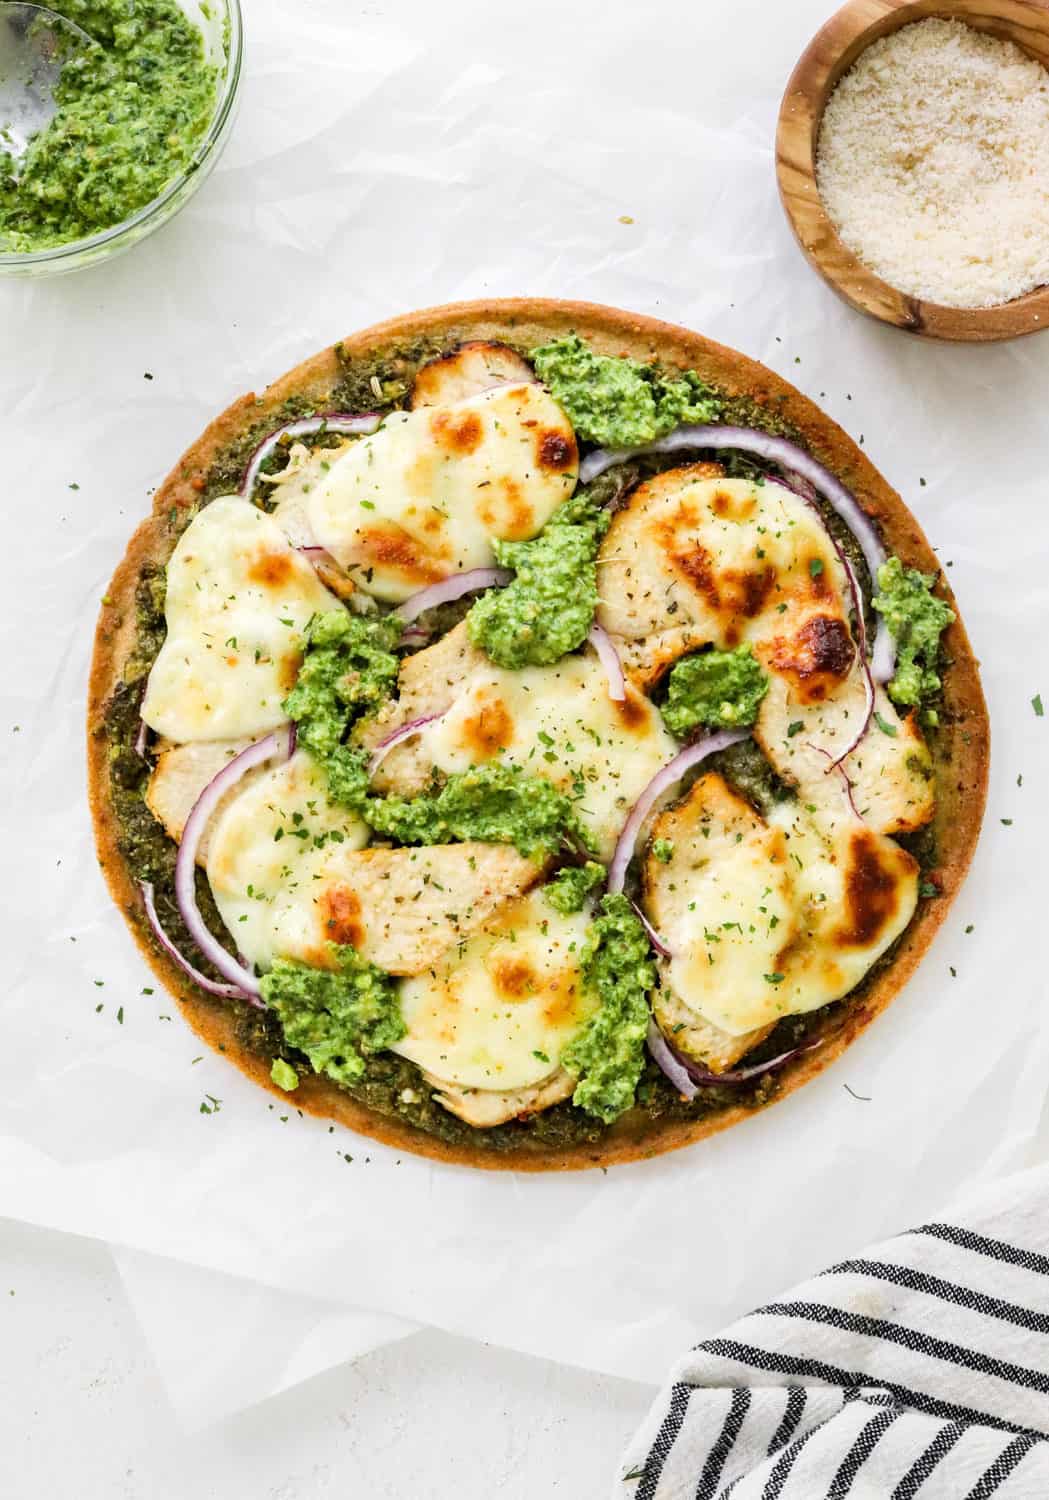 Round thin crust pizza topping with sliced chicken, green pesto and melty cheese on a white surface with more pesto and cheese in bowls behind it. 